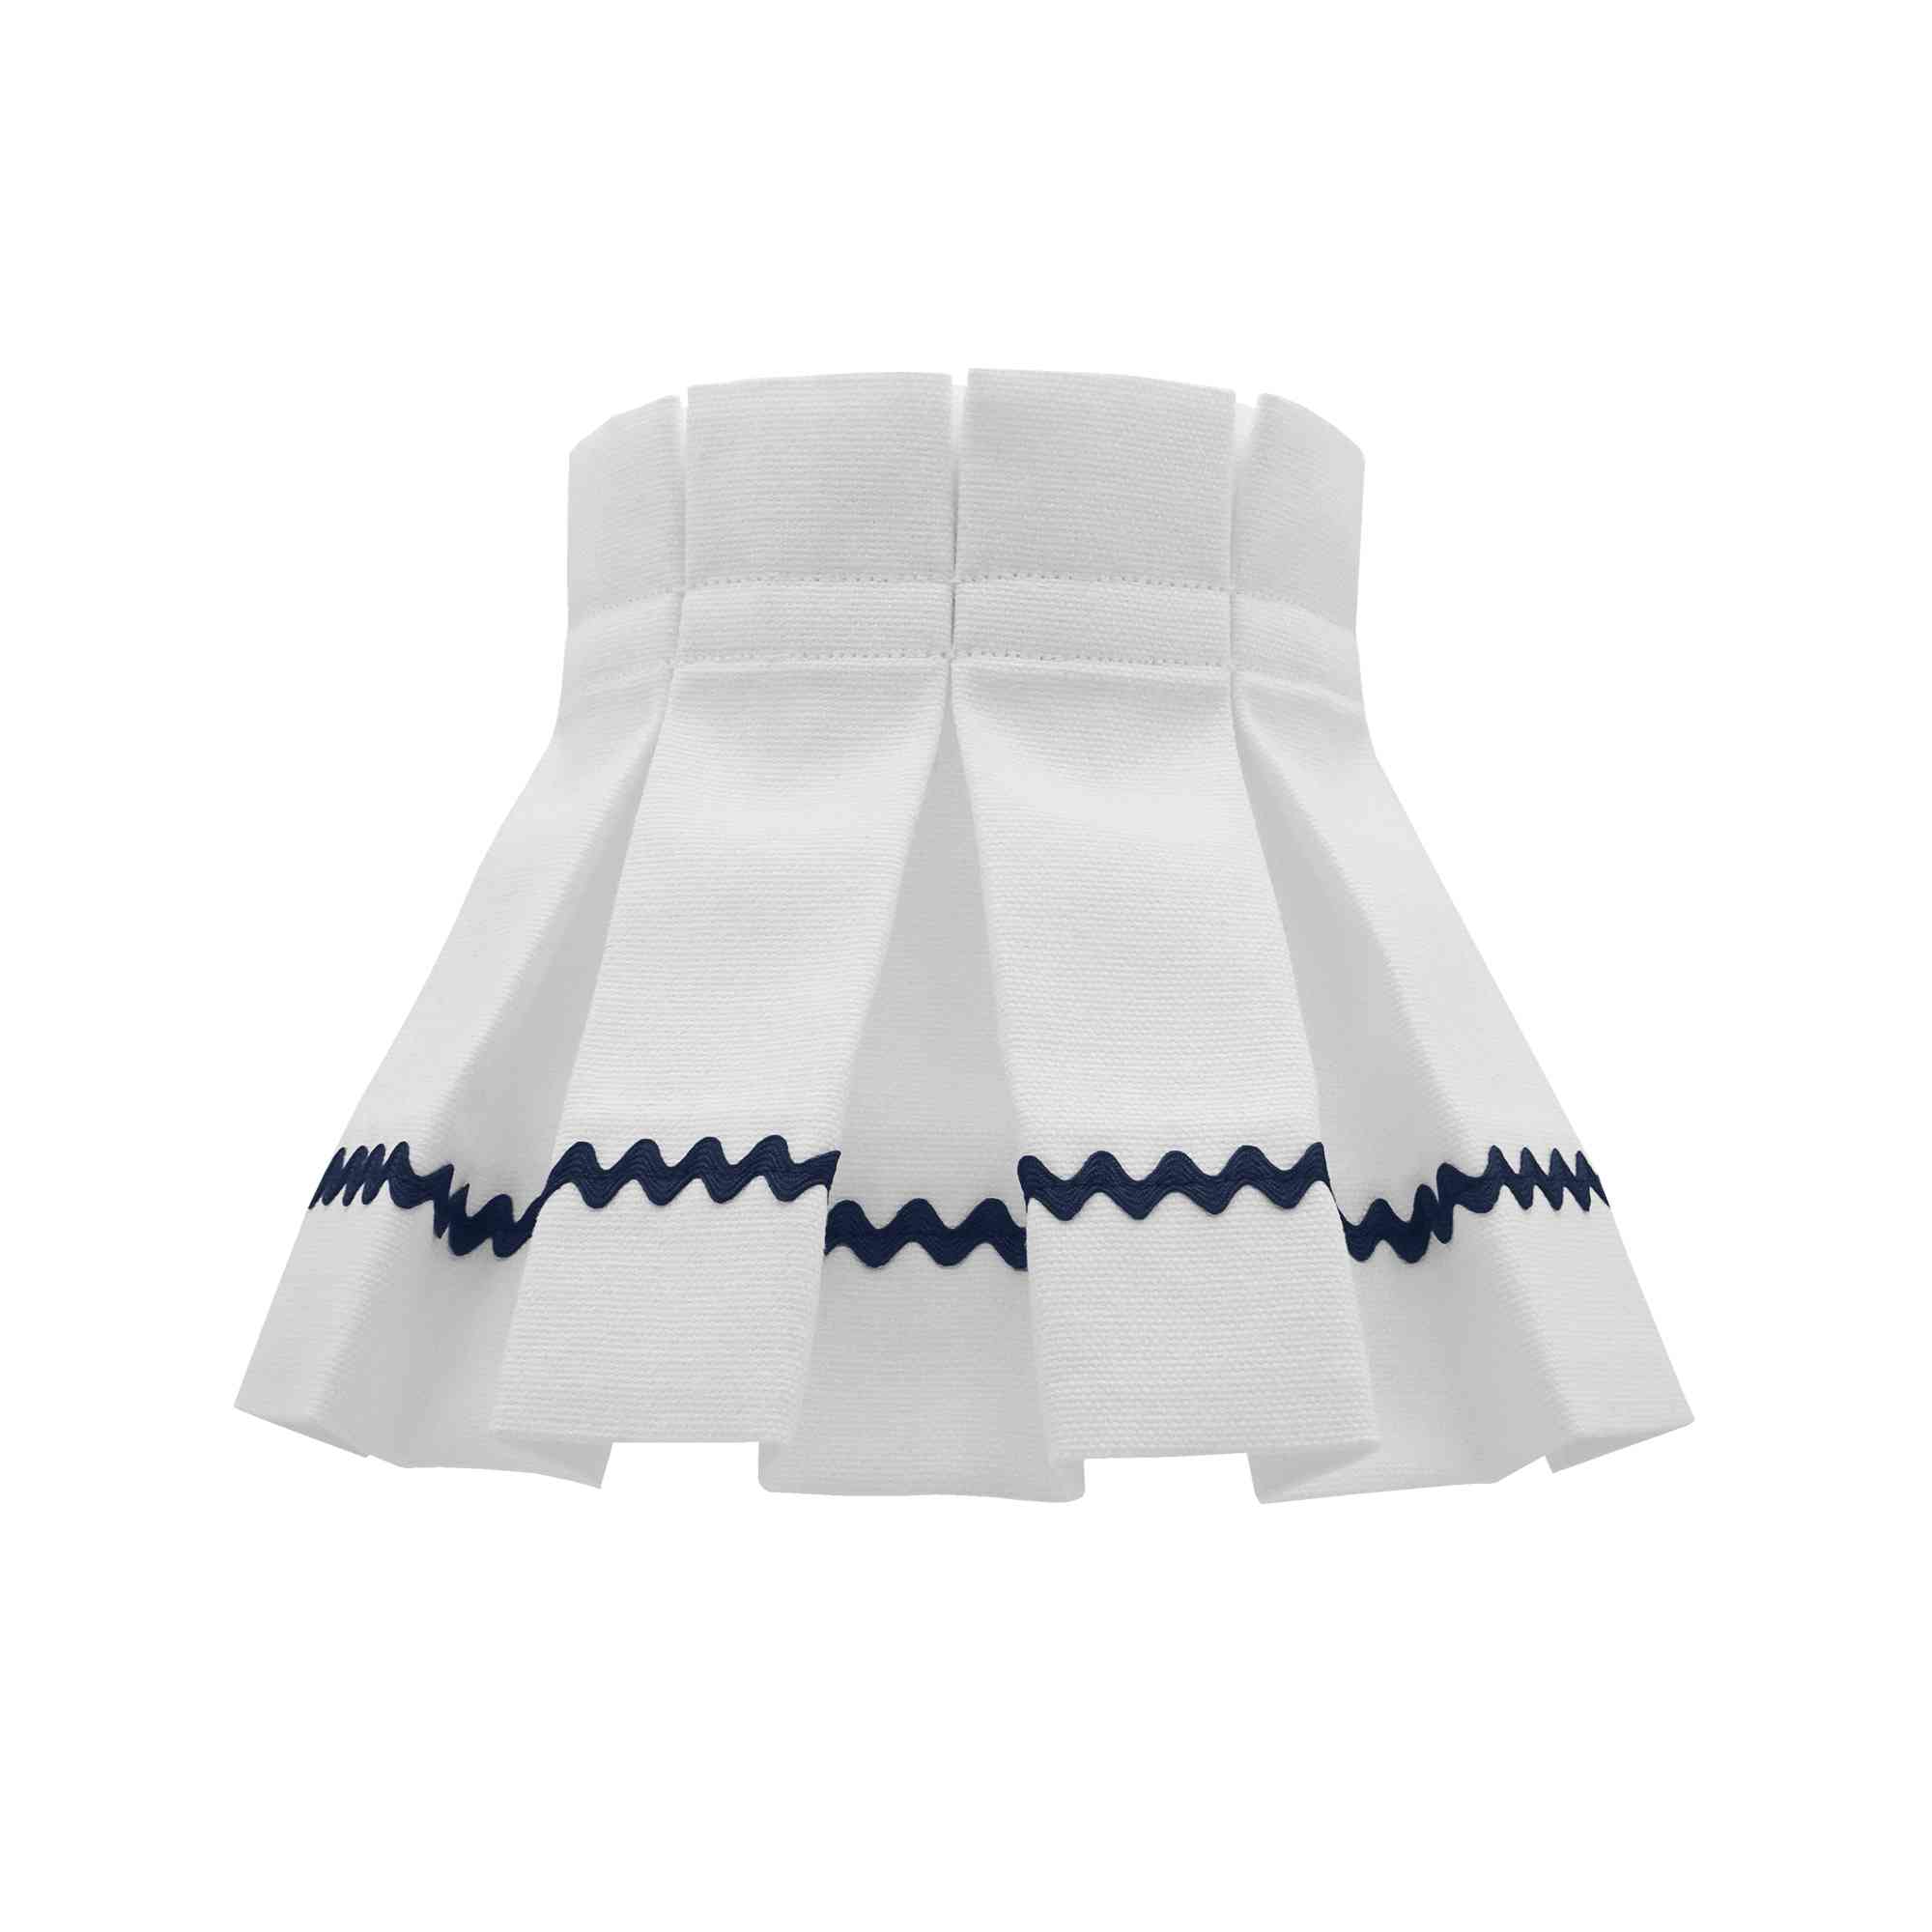 SQUIGGLE CLASSIC BOX PLEAT LAMPSHADE | NAVY/WHITE